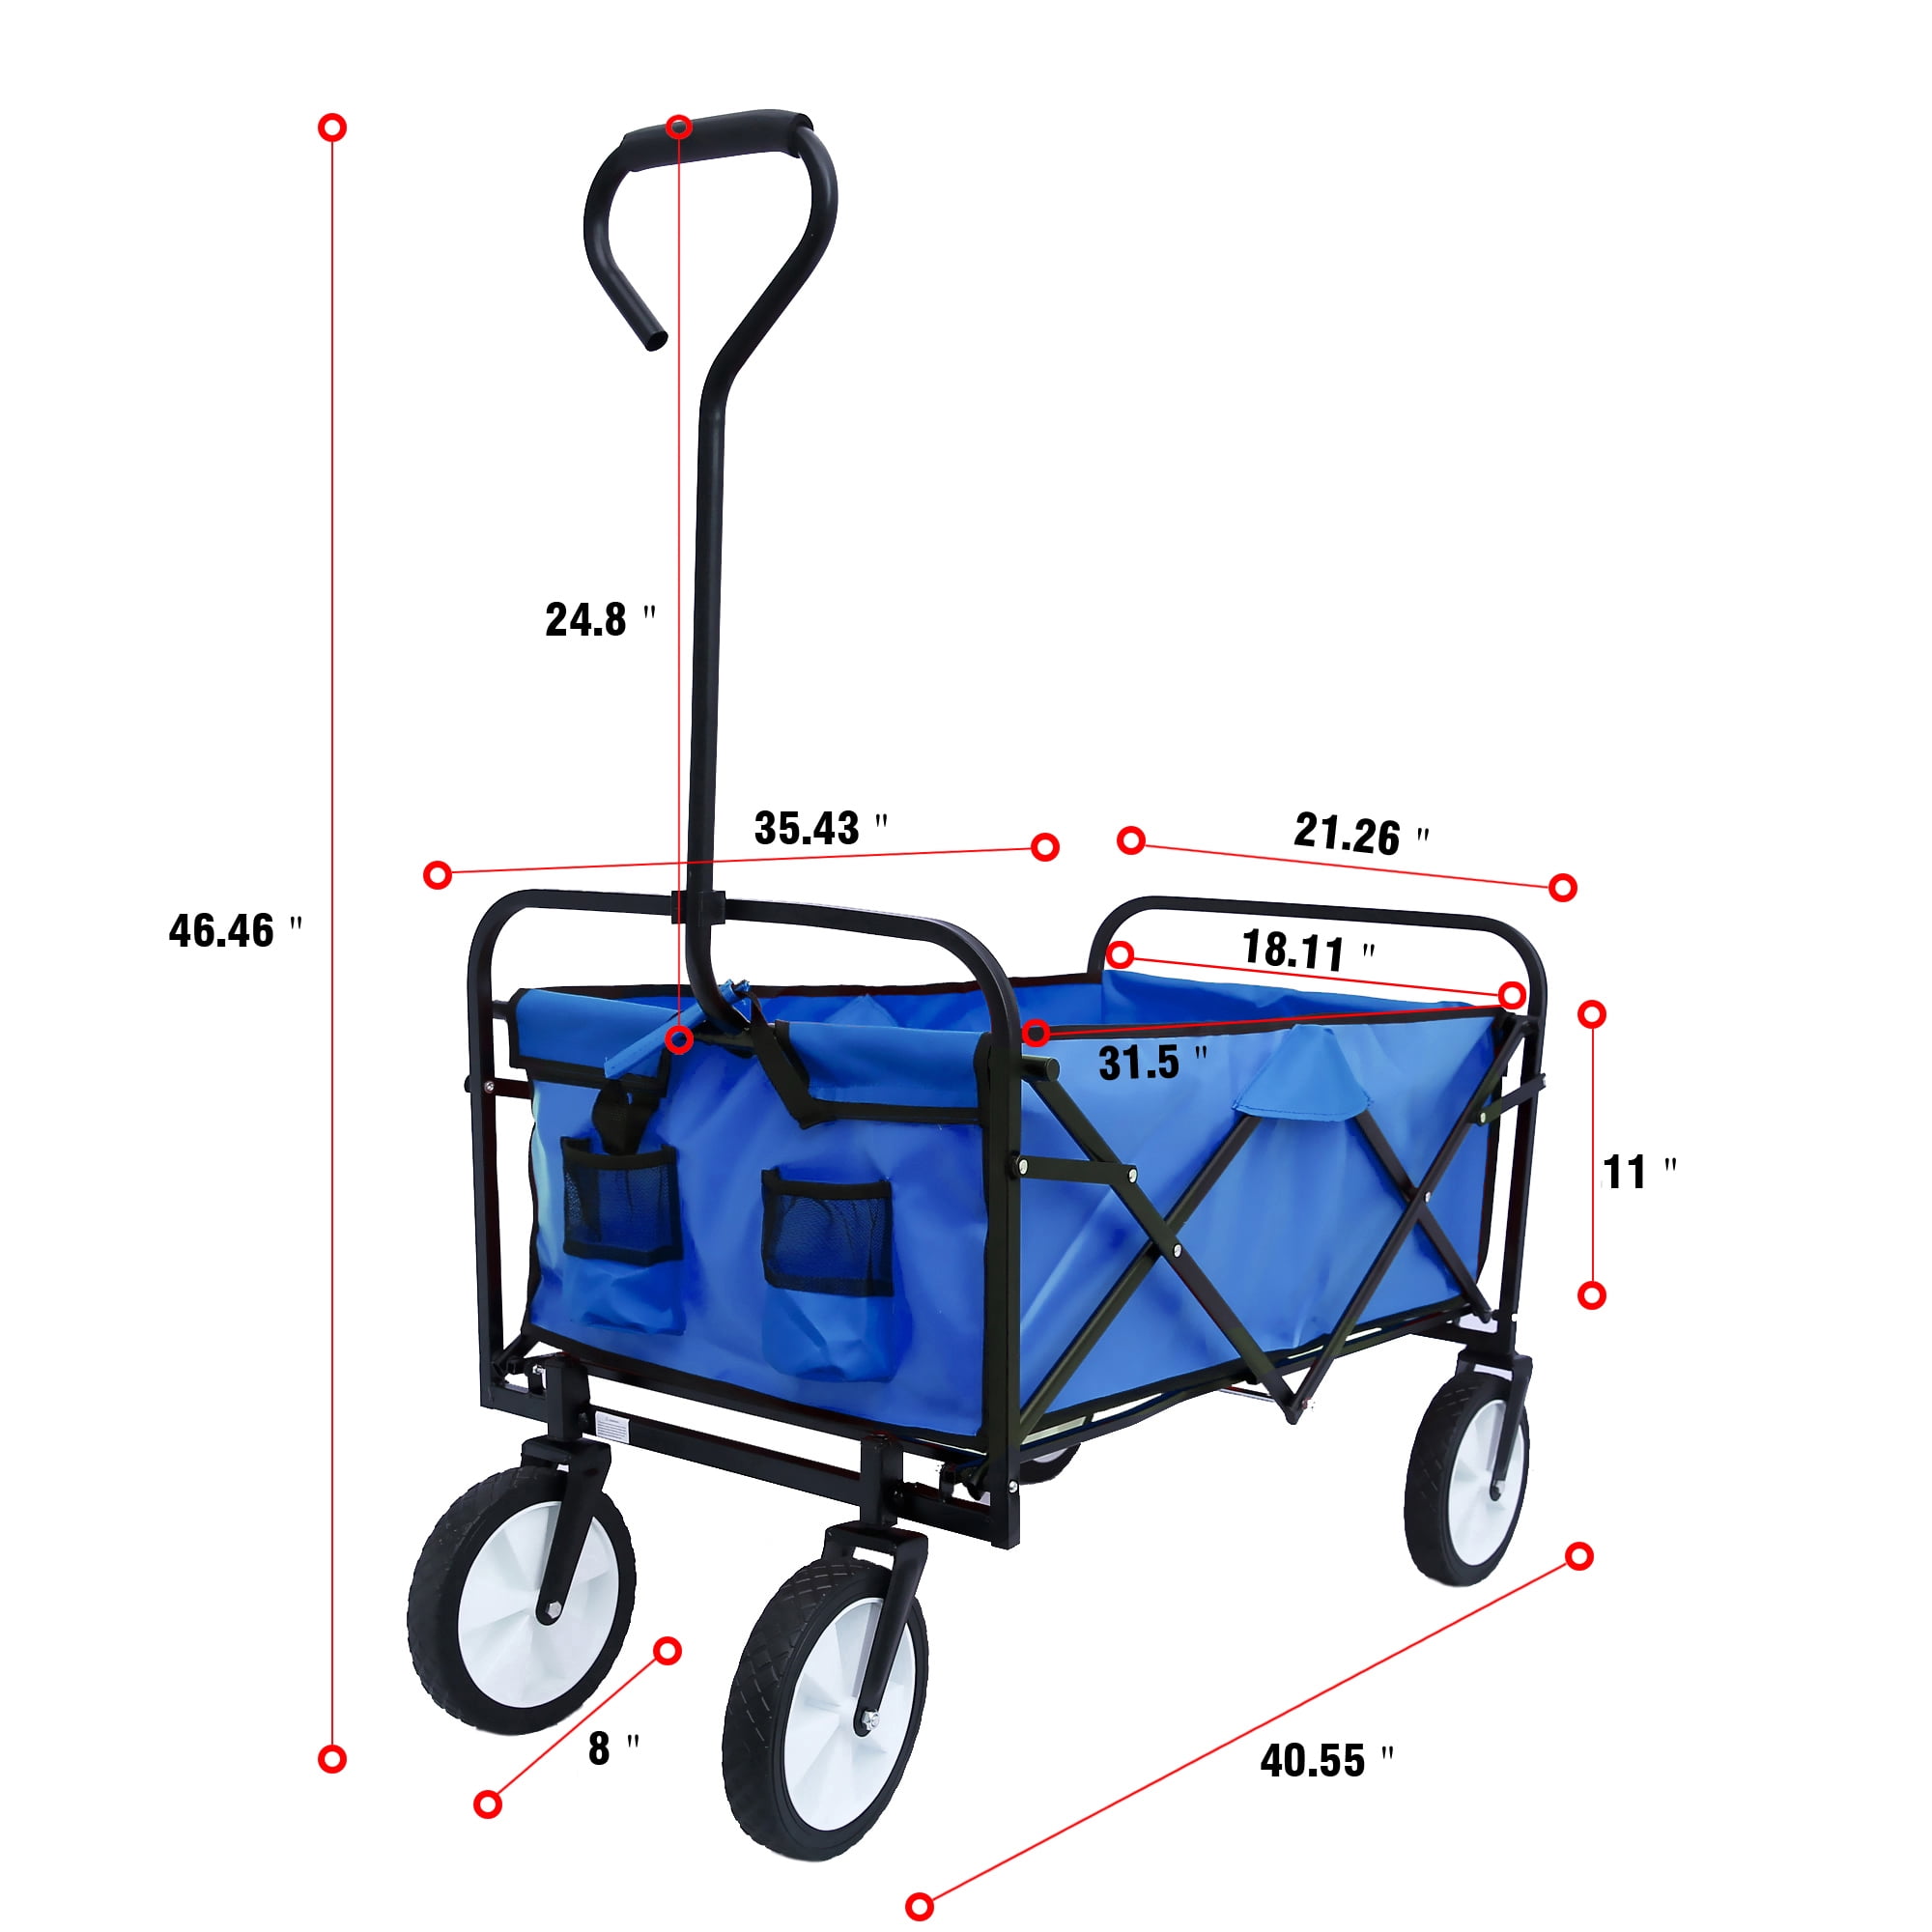 Collapsible Push Folding Utility Wagon Trolley 丨 Laundry Trolley Carrier with Heavy Duty Flexible Fashion Design Navy Blue Freshore® Grocery Shopping Cart with Wheels 